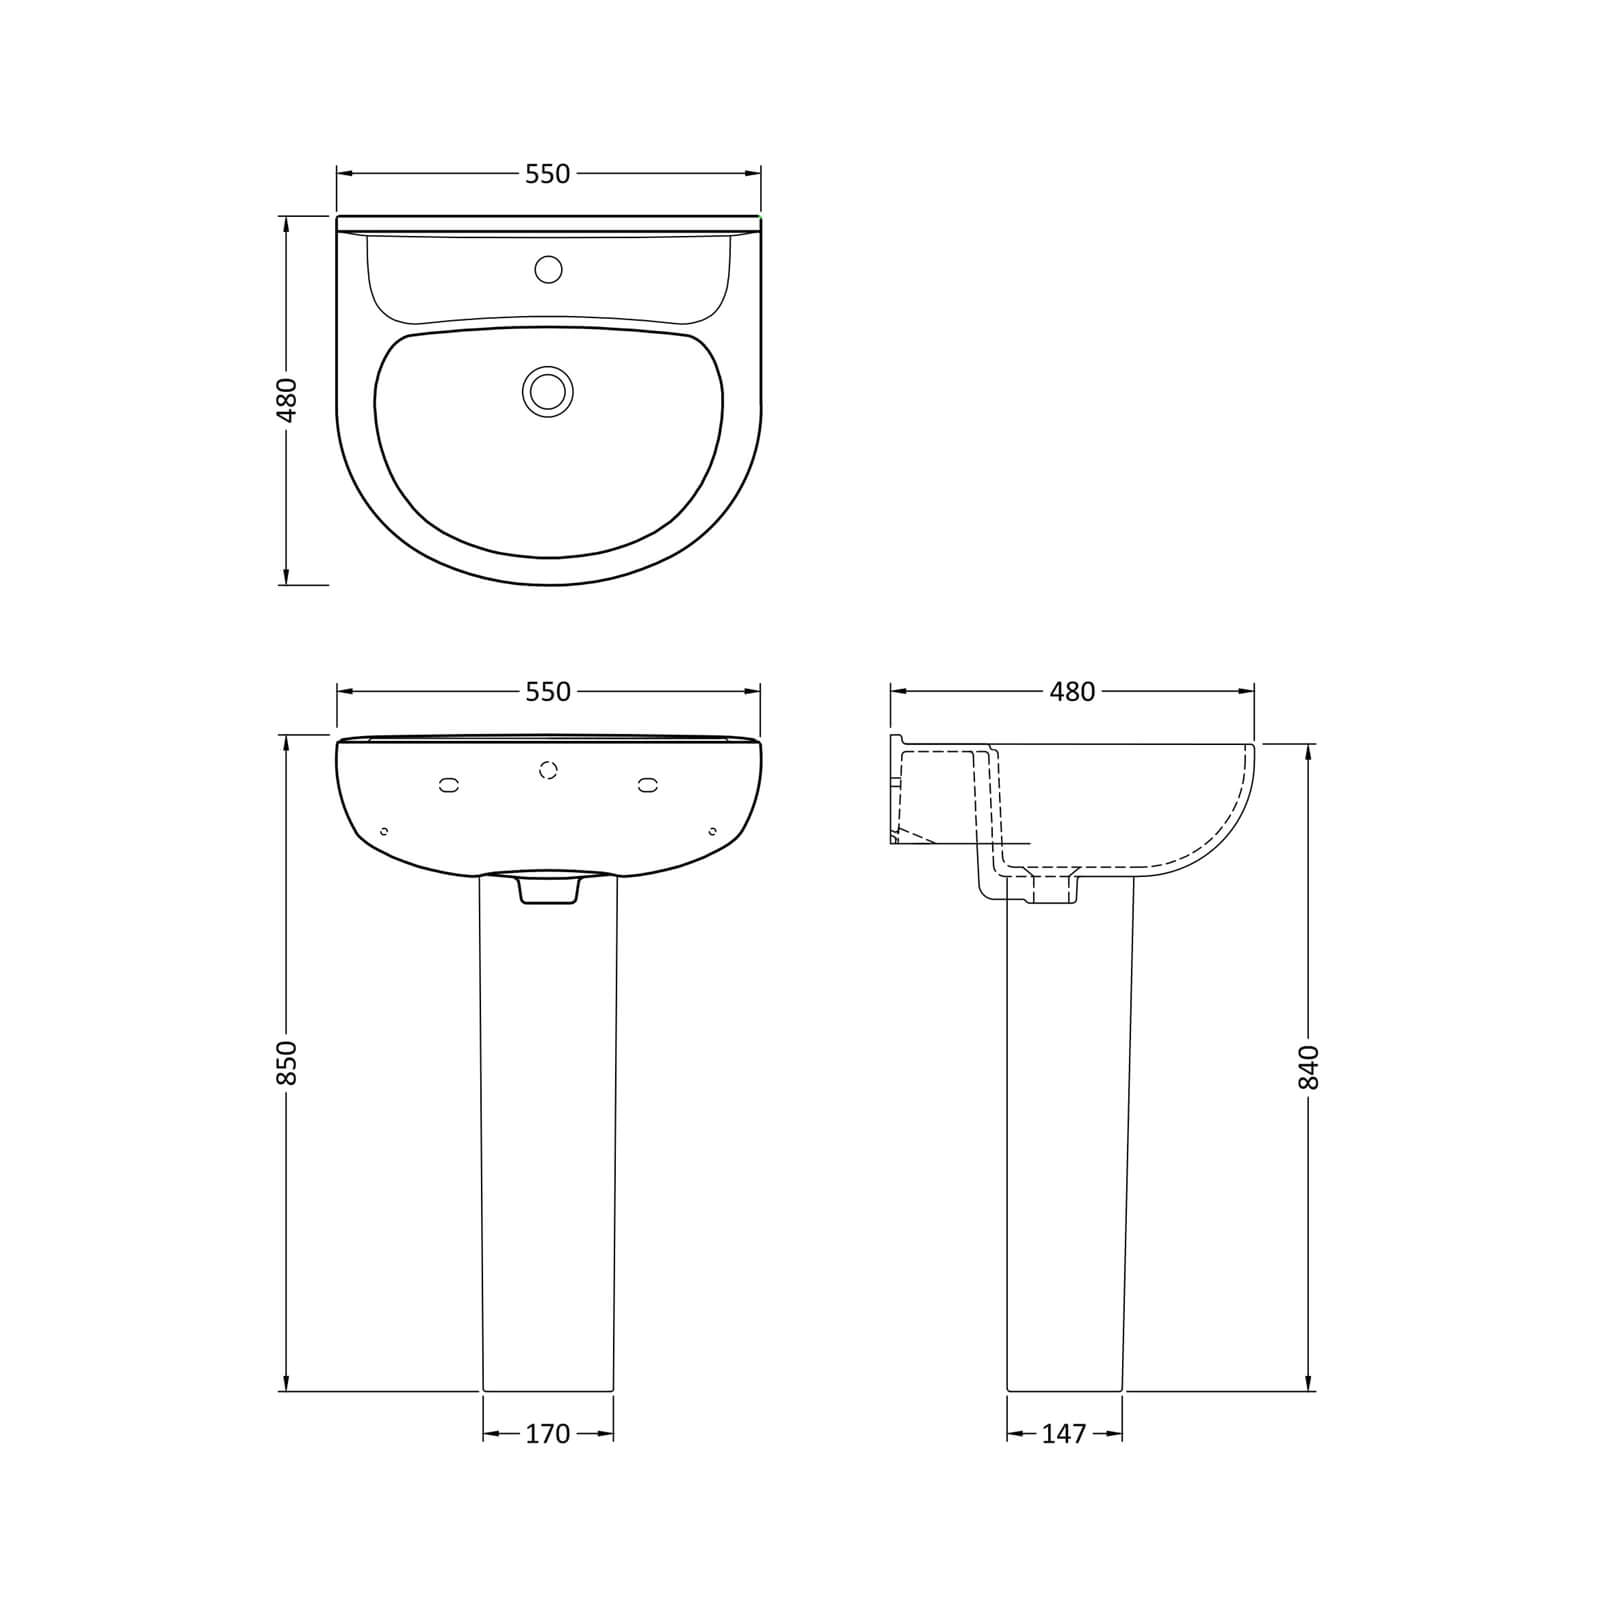 Balterley Ridley 1 Tap Hole Basin and Full Pedestal - 550mm